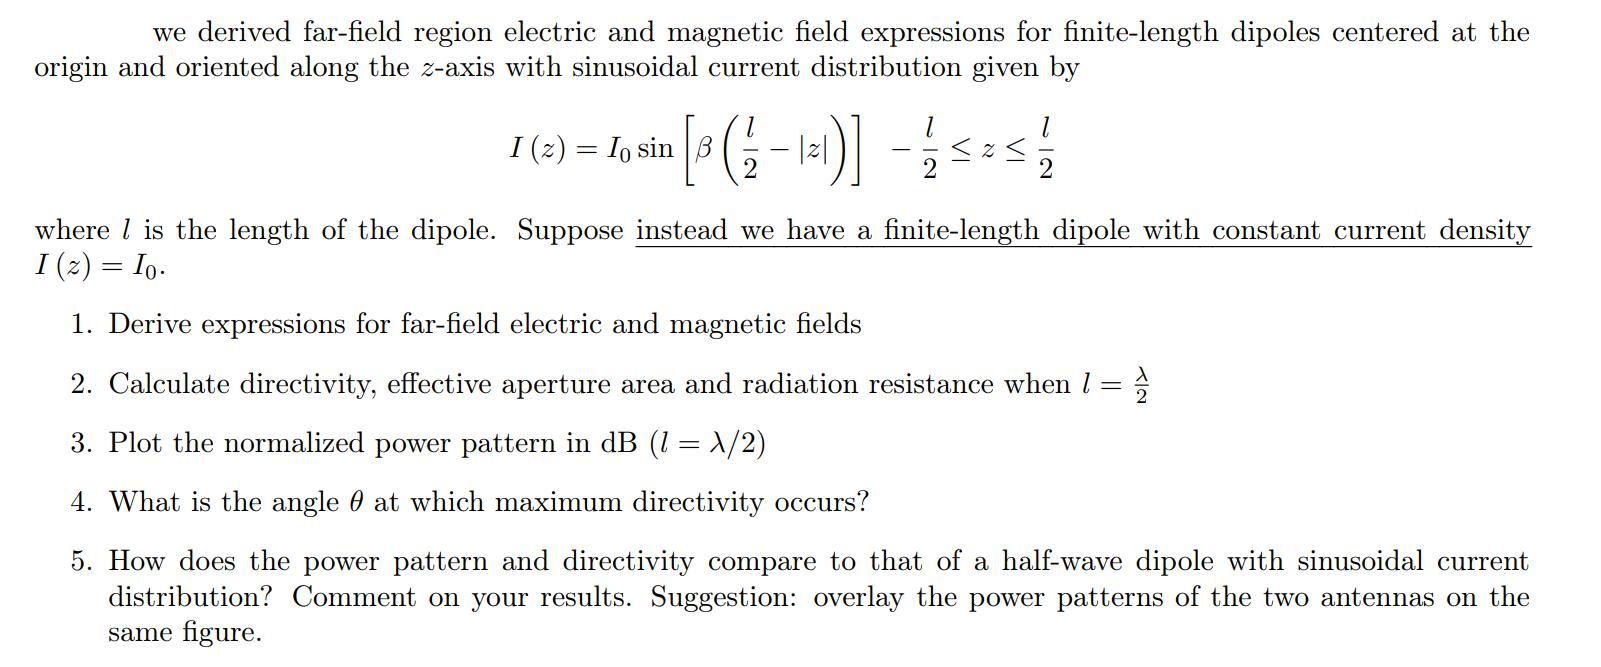 we derived far-field region electric and magnetic field expressions for finite-length dipoles centered at the